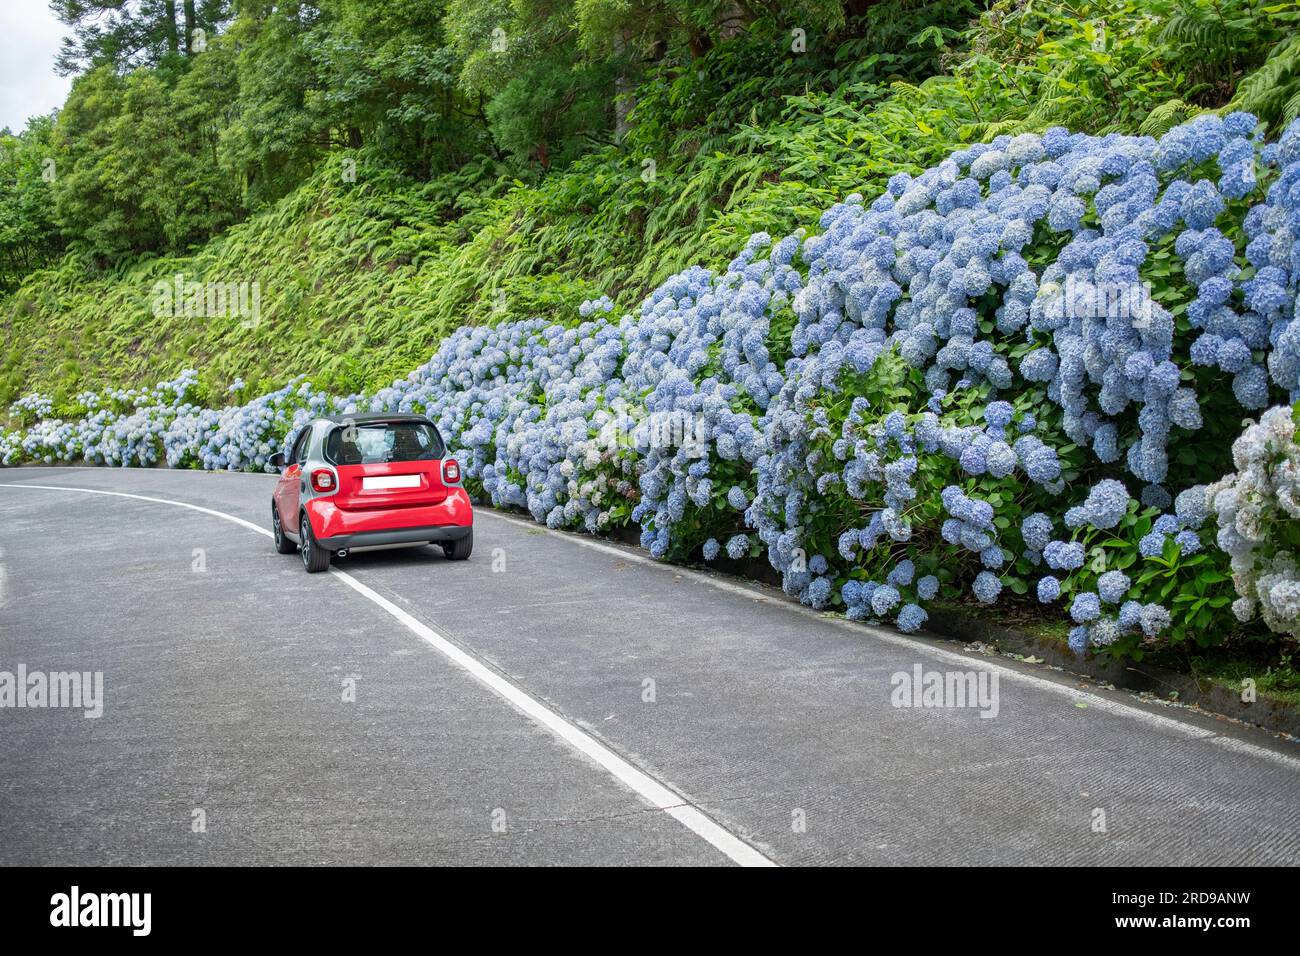 Sete Cidades, Azores: 30.07.2019: Red car on the road with blue hydrangea flowers. Sao Miguel island in the Azores Stock Photo